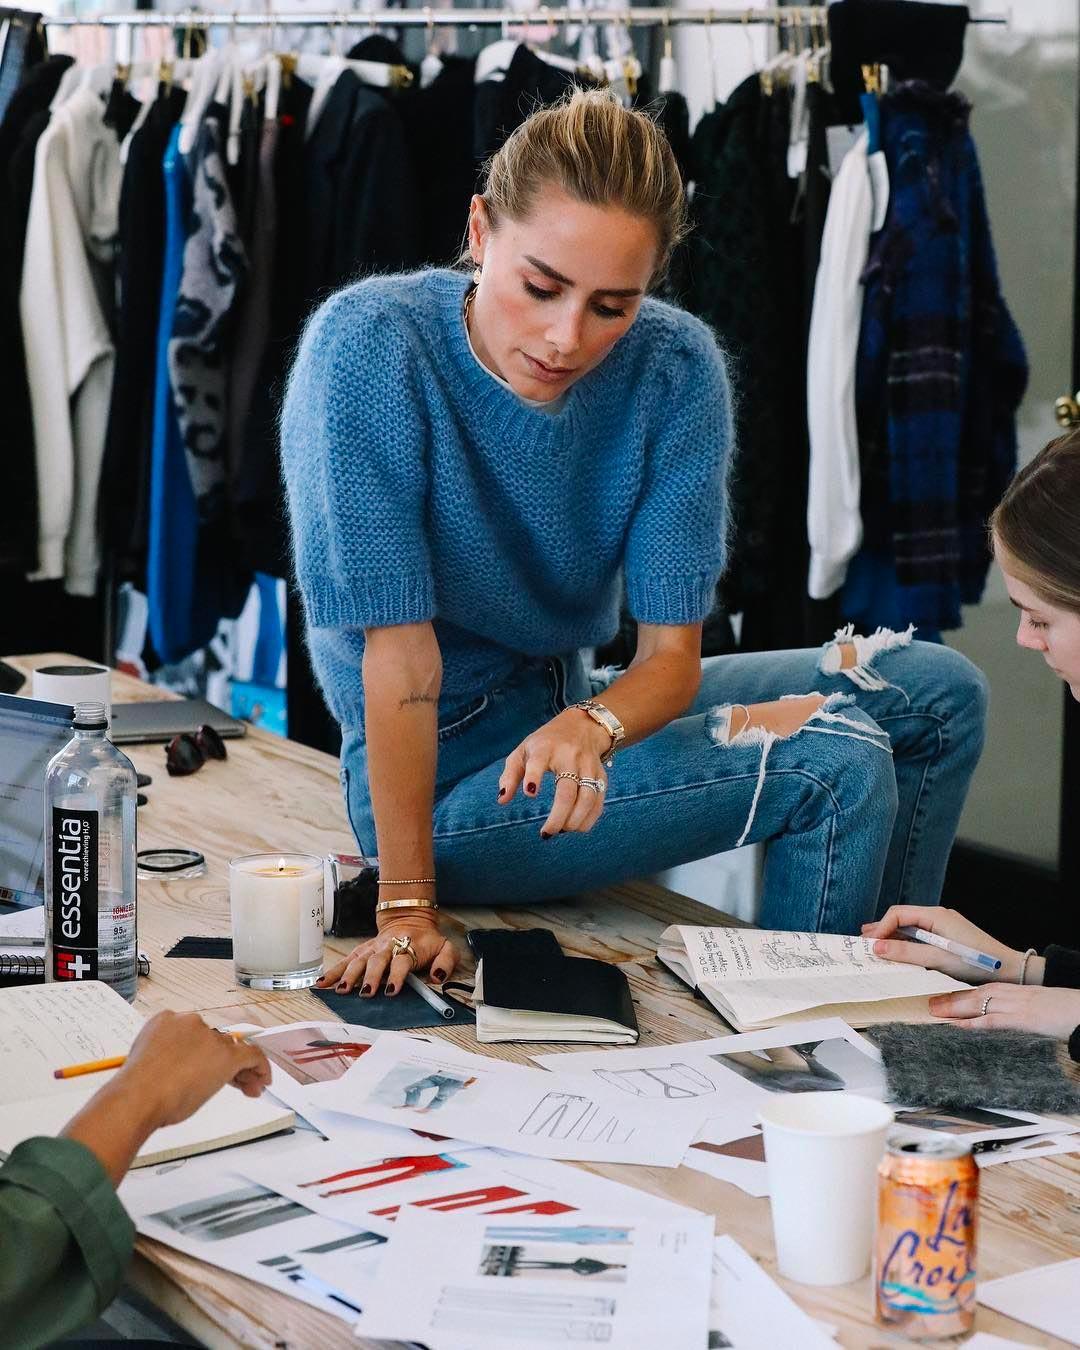 Fashion jobs and how to get one Beyond Talent Recruitment